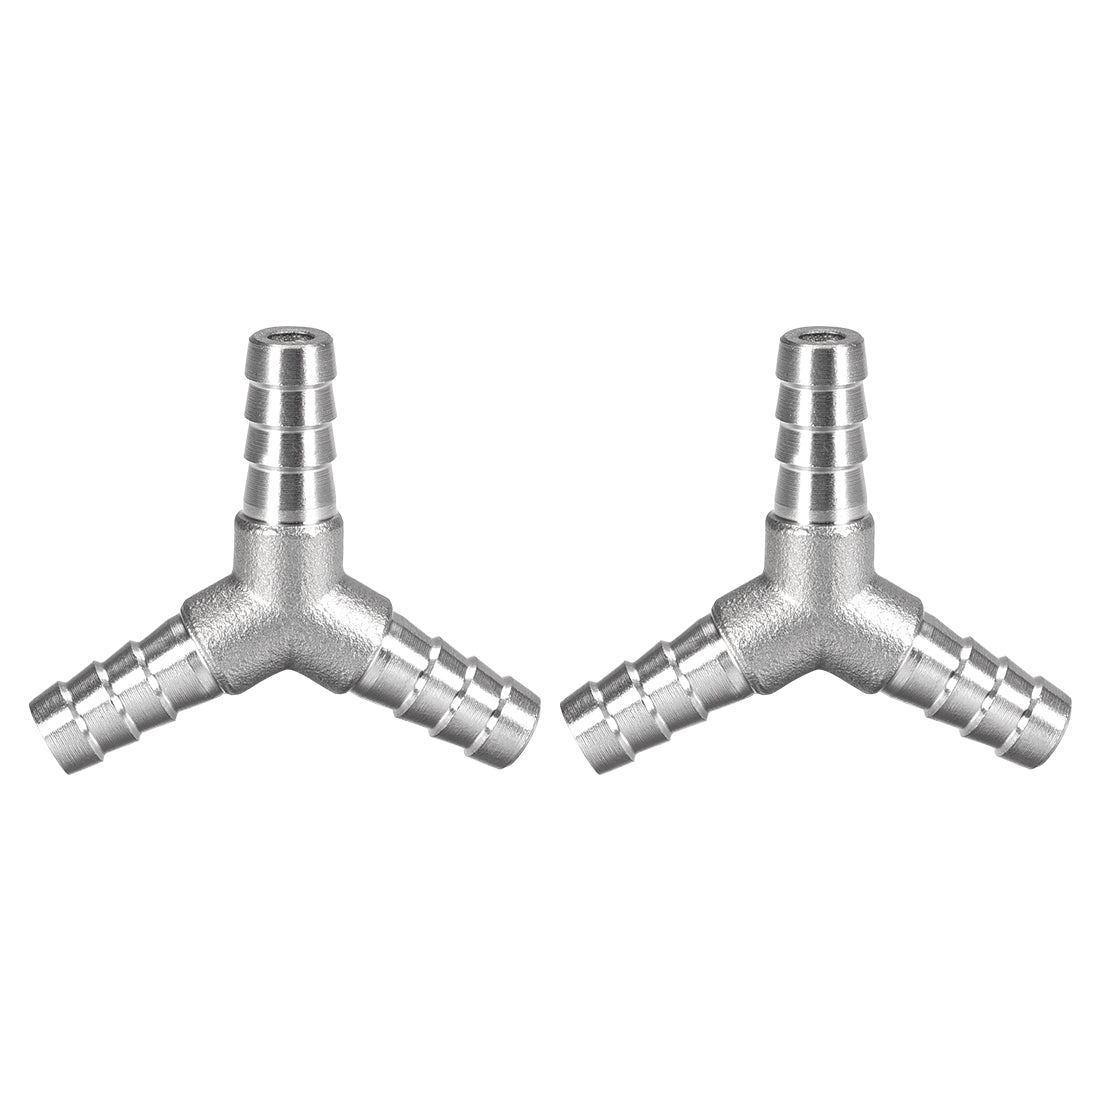 uxcell Uxcell 3/8-Inch (10mm) Hose ID Barb Fitting Stainless Steel 3 Way Y Shaped Union Home Brew Fitting 2pcs